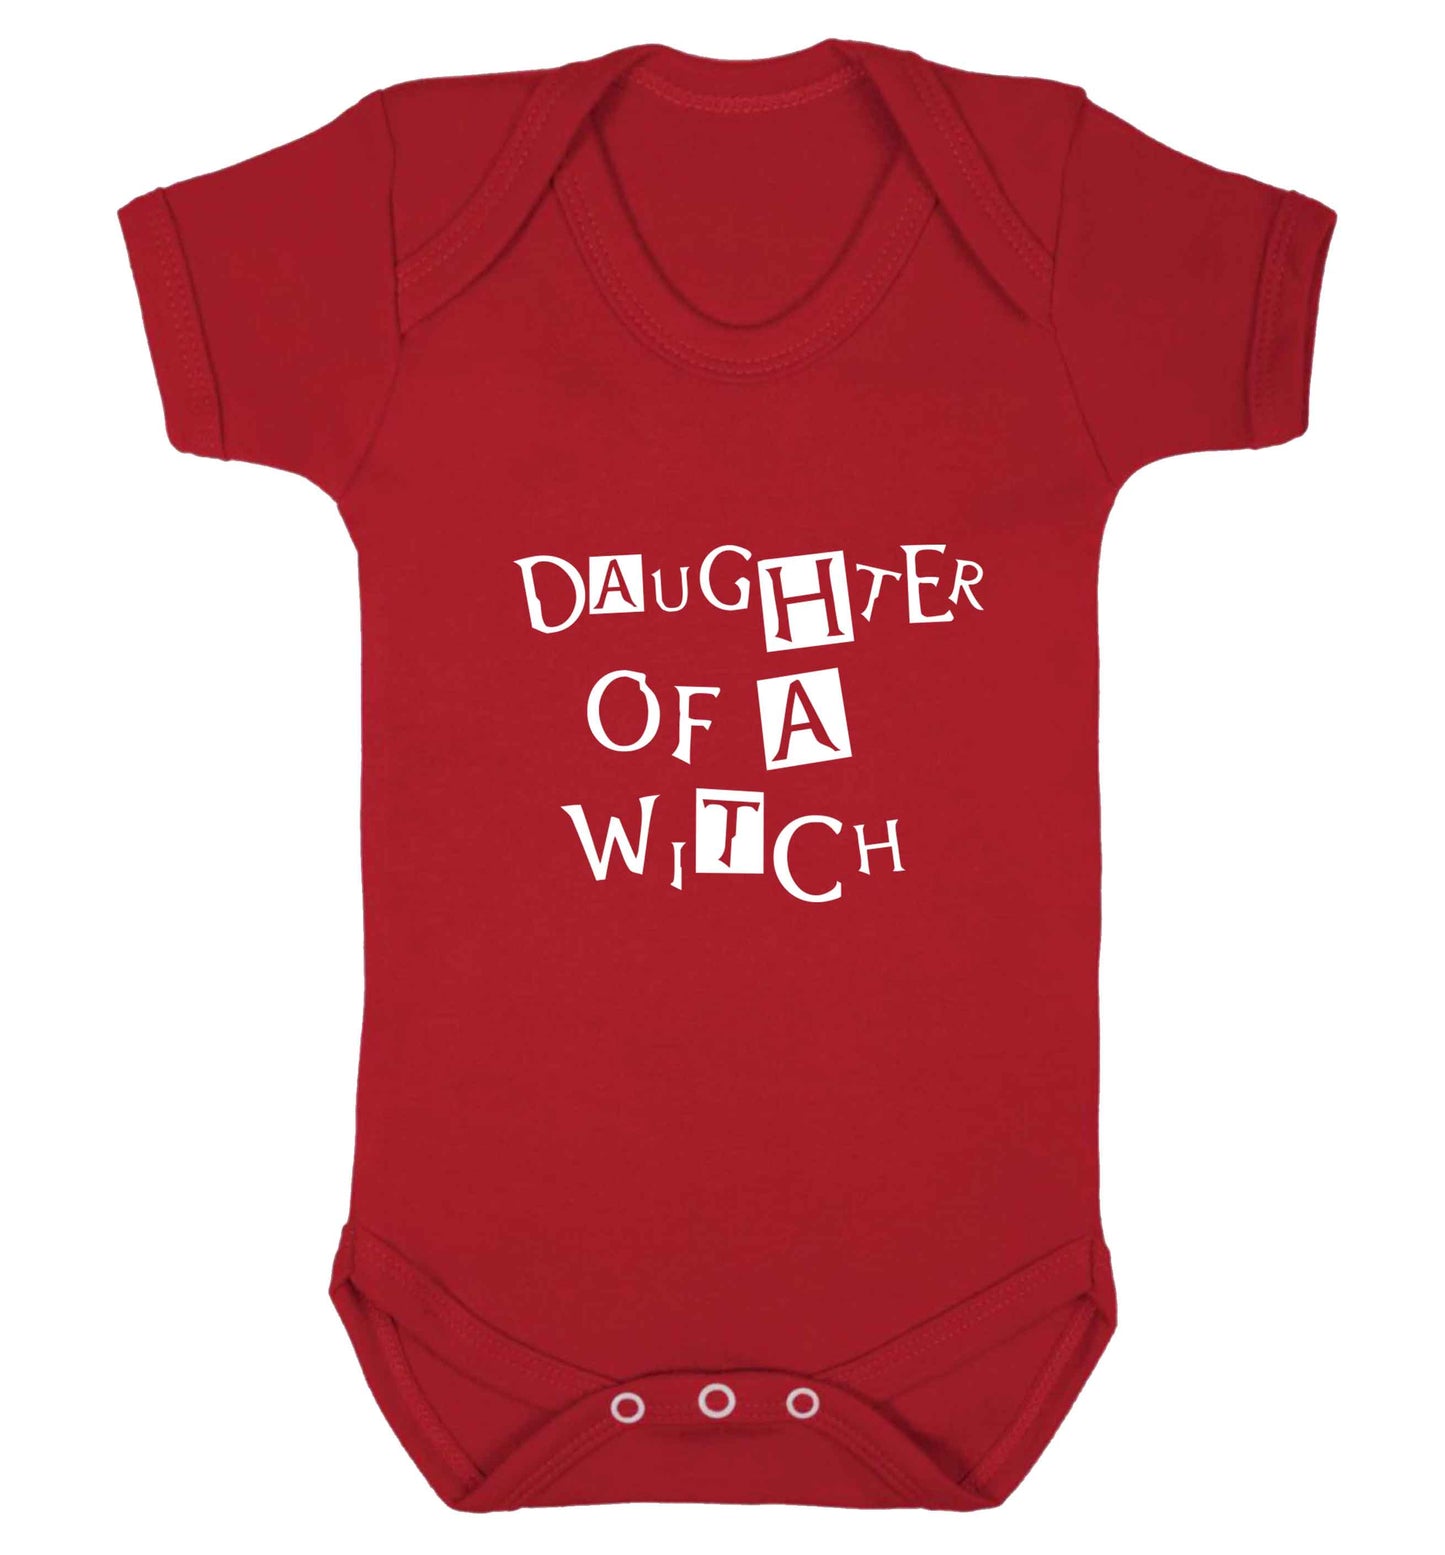 Daughter of a witch baby vest red 18-24 months